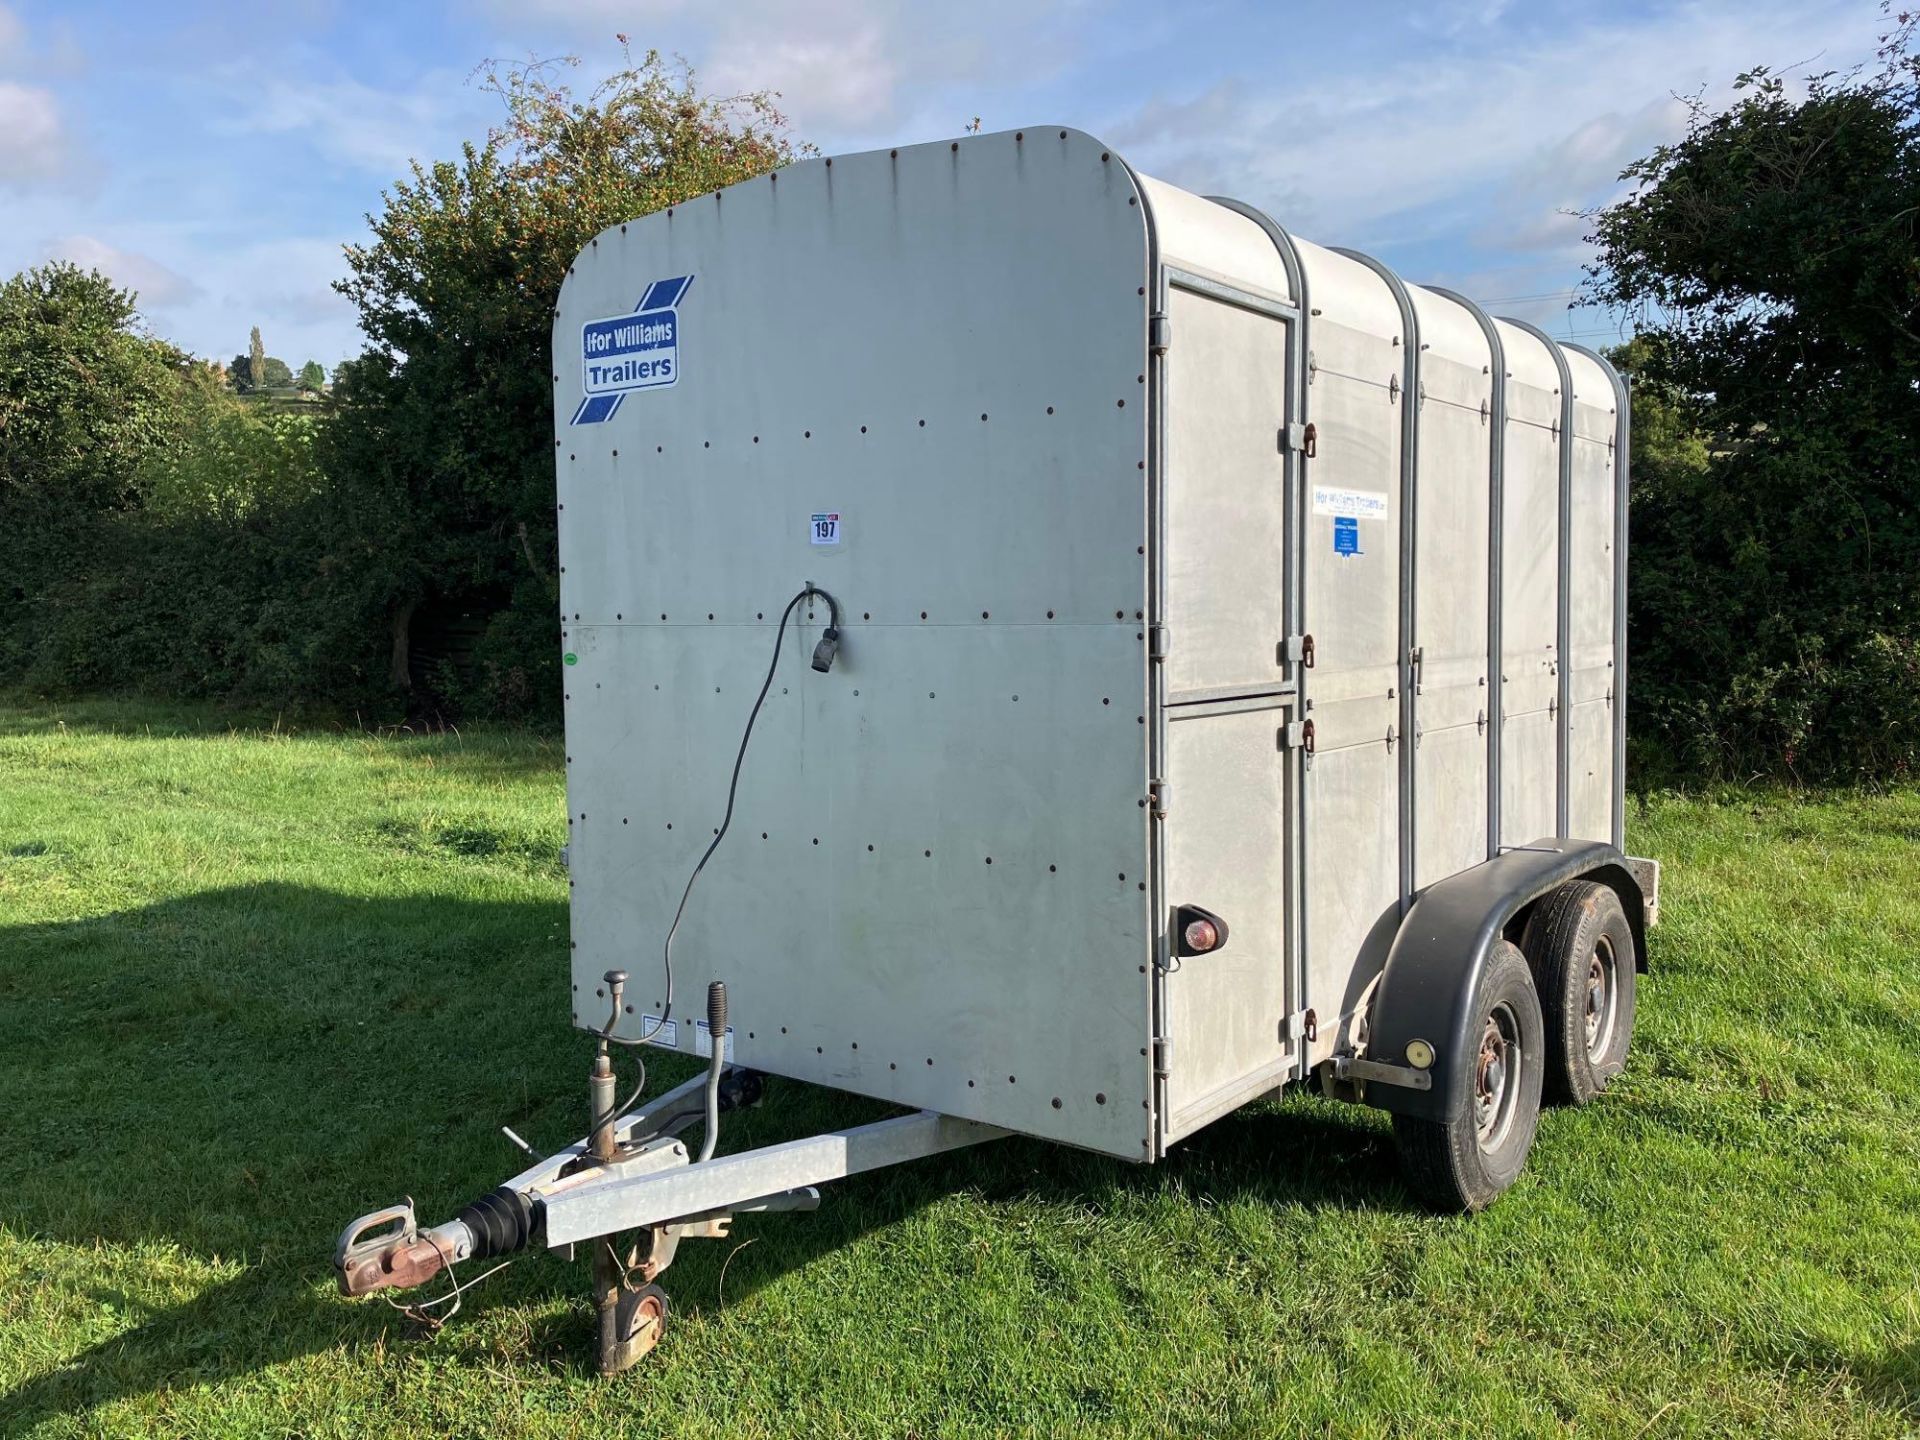 Ifor Williams TA5G twin axle livestock trailer with sheep deck. NO VAT